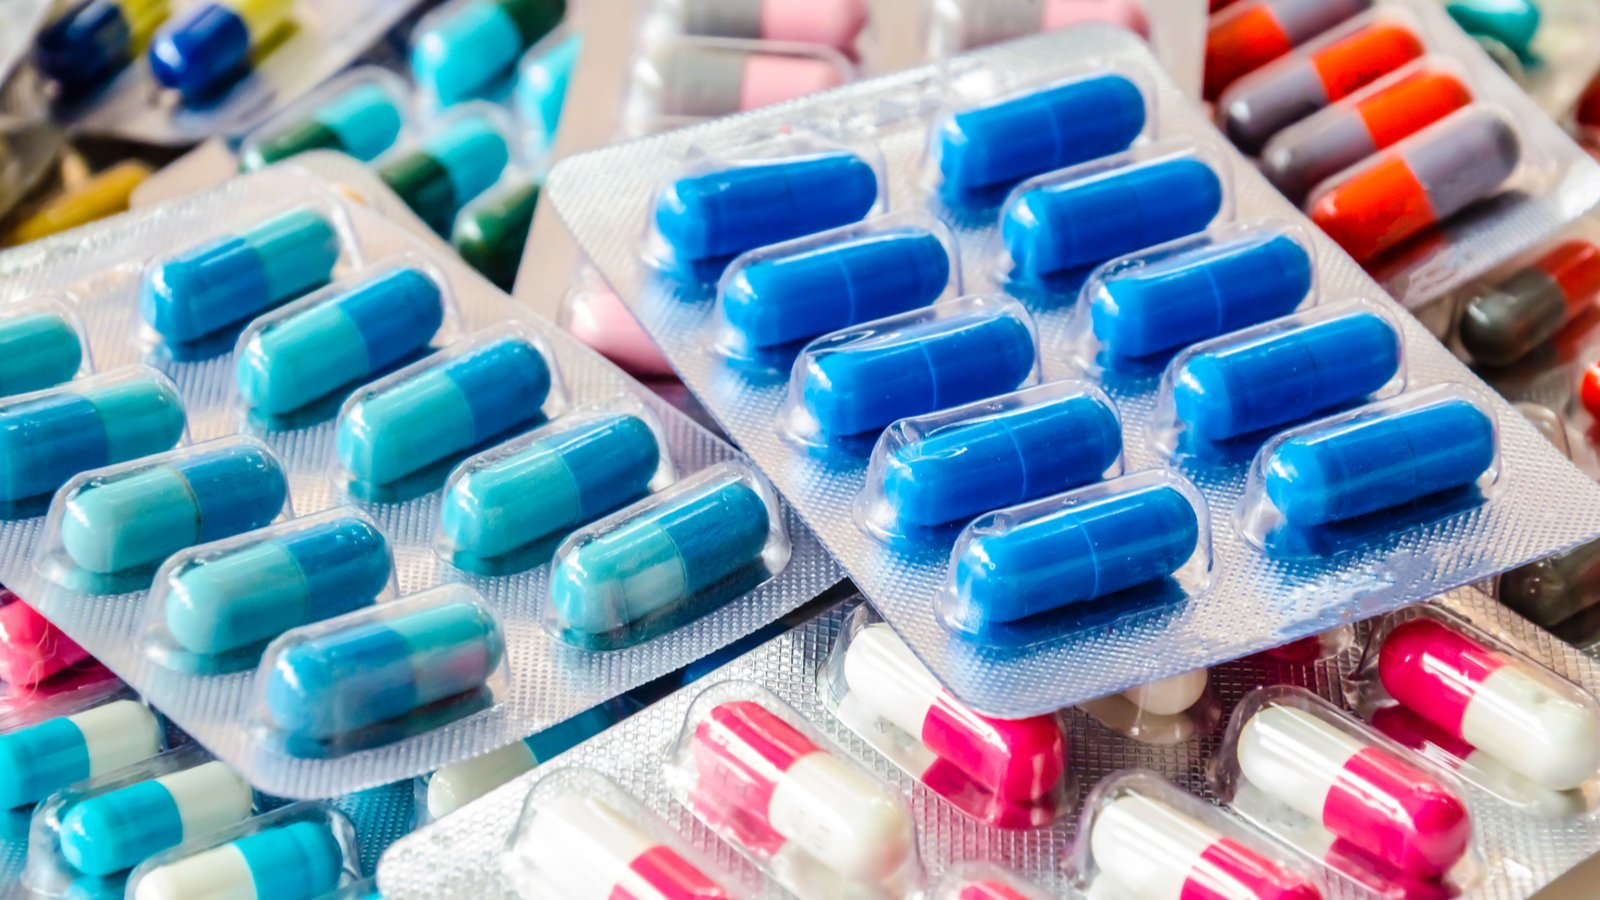 Packs of blue and pink pills are piled on top of each other representing ALT stock.